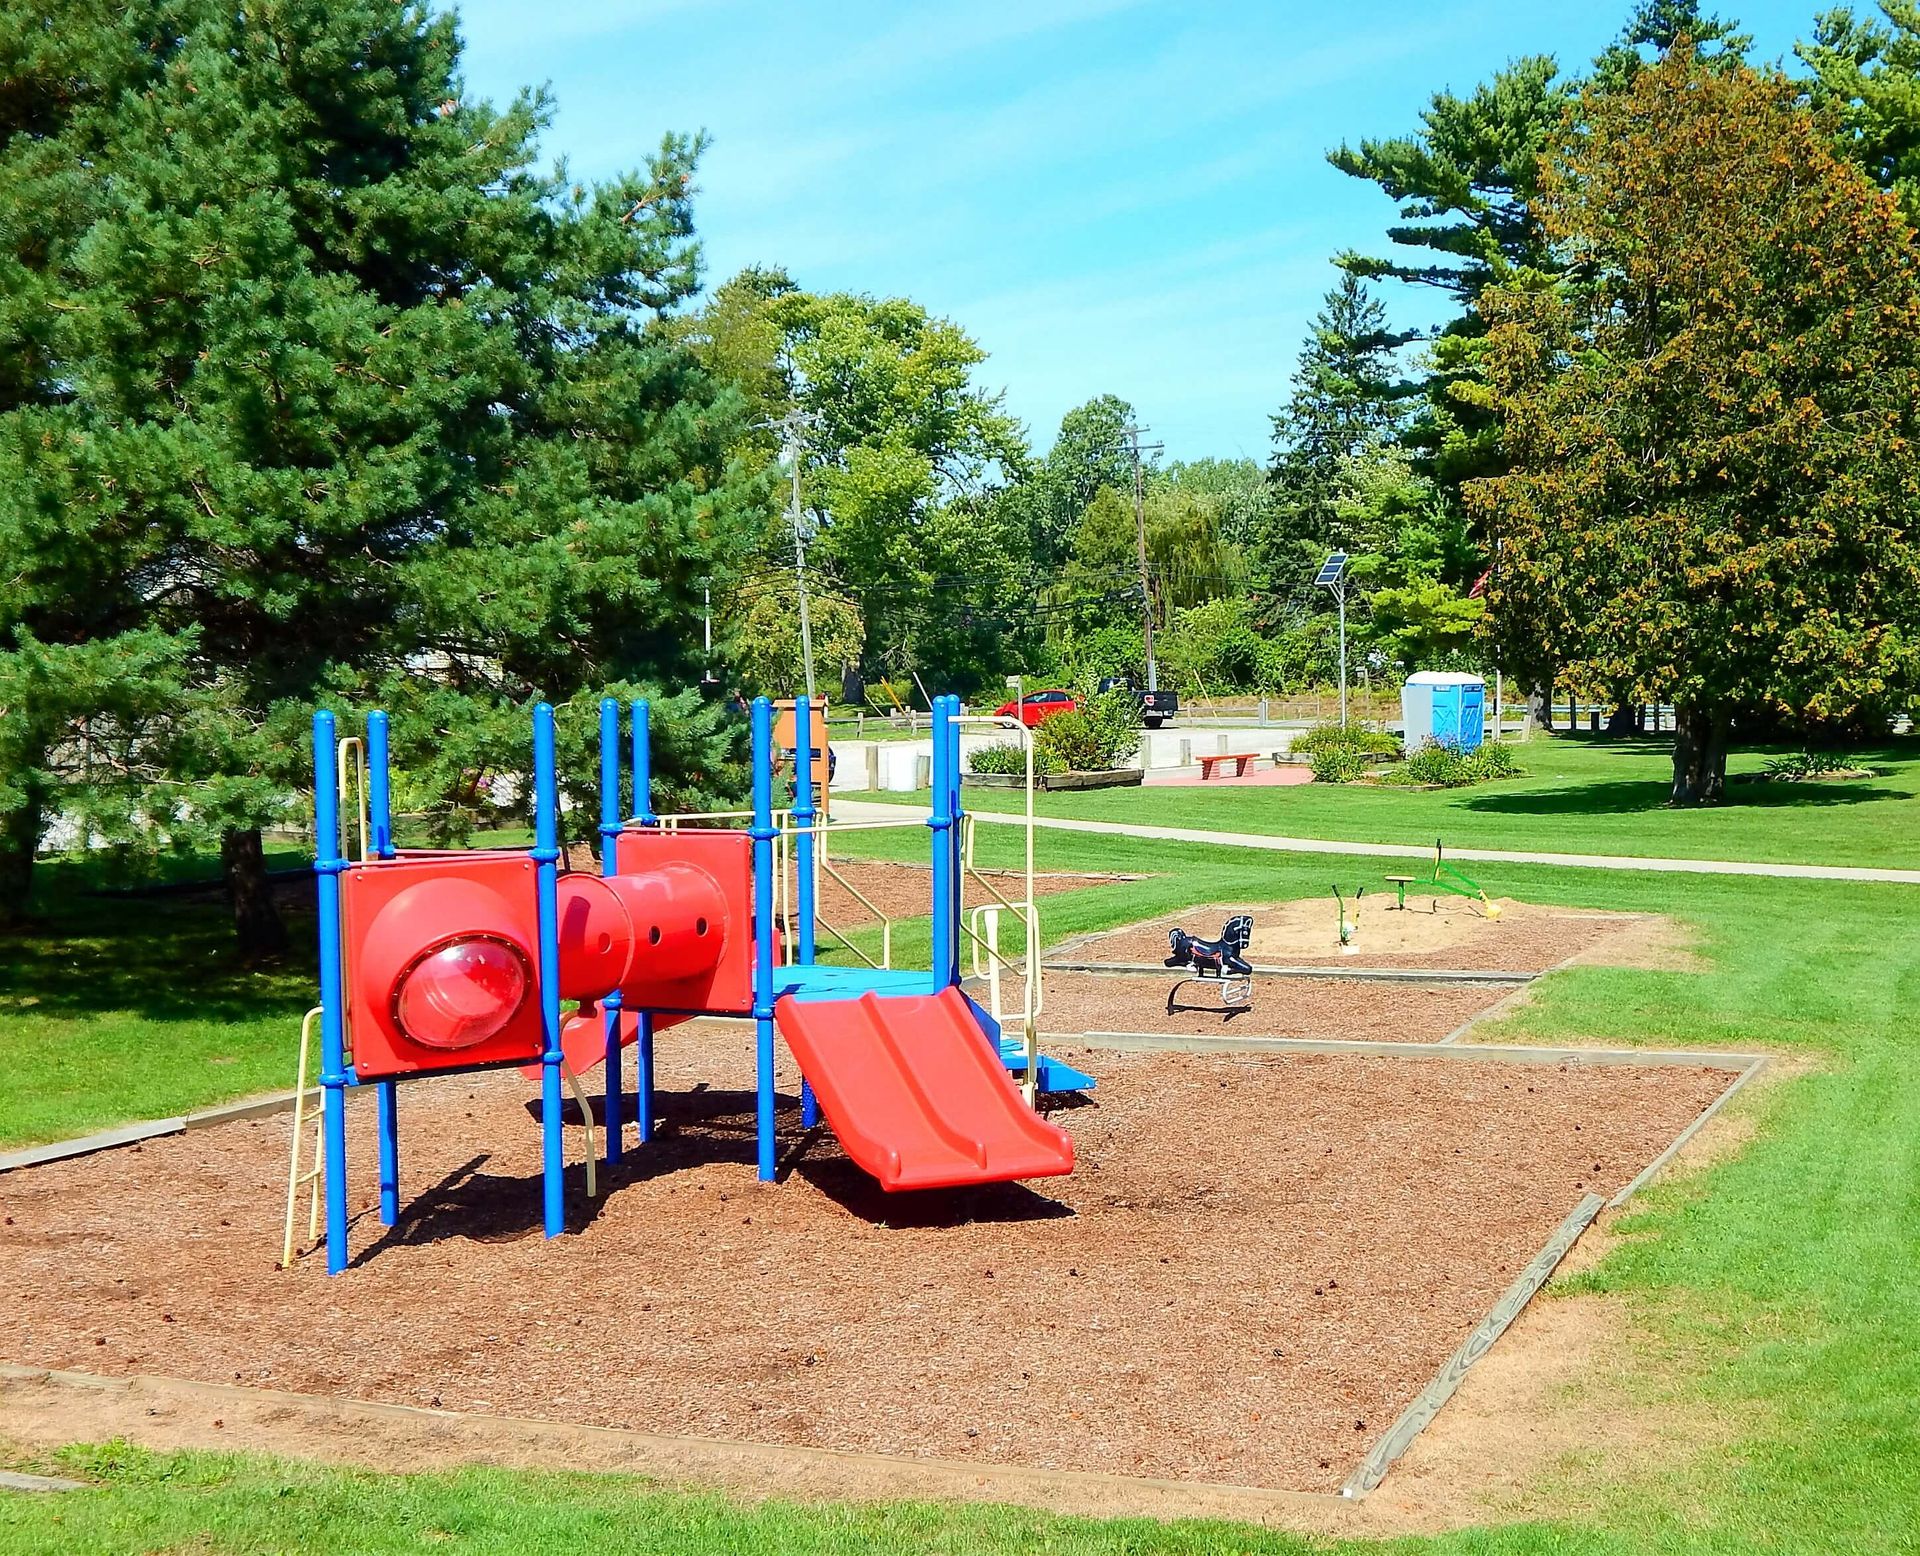 A red and blue playground set in a park.